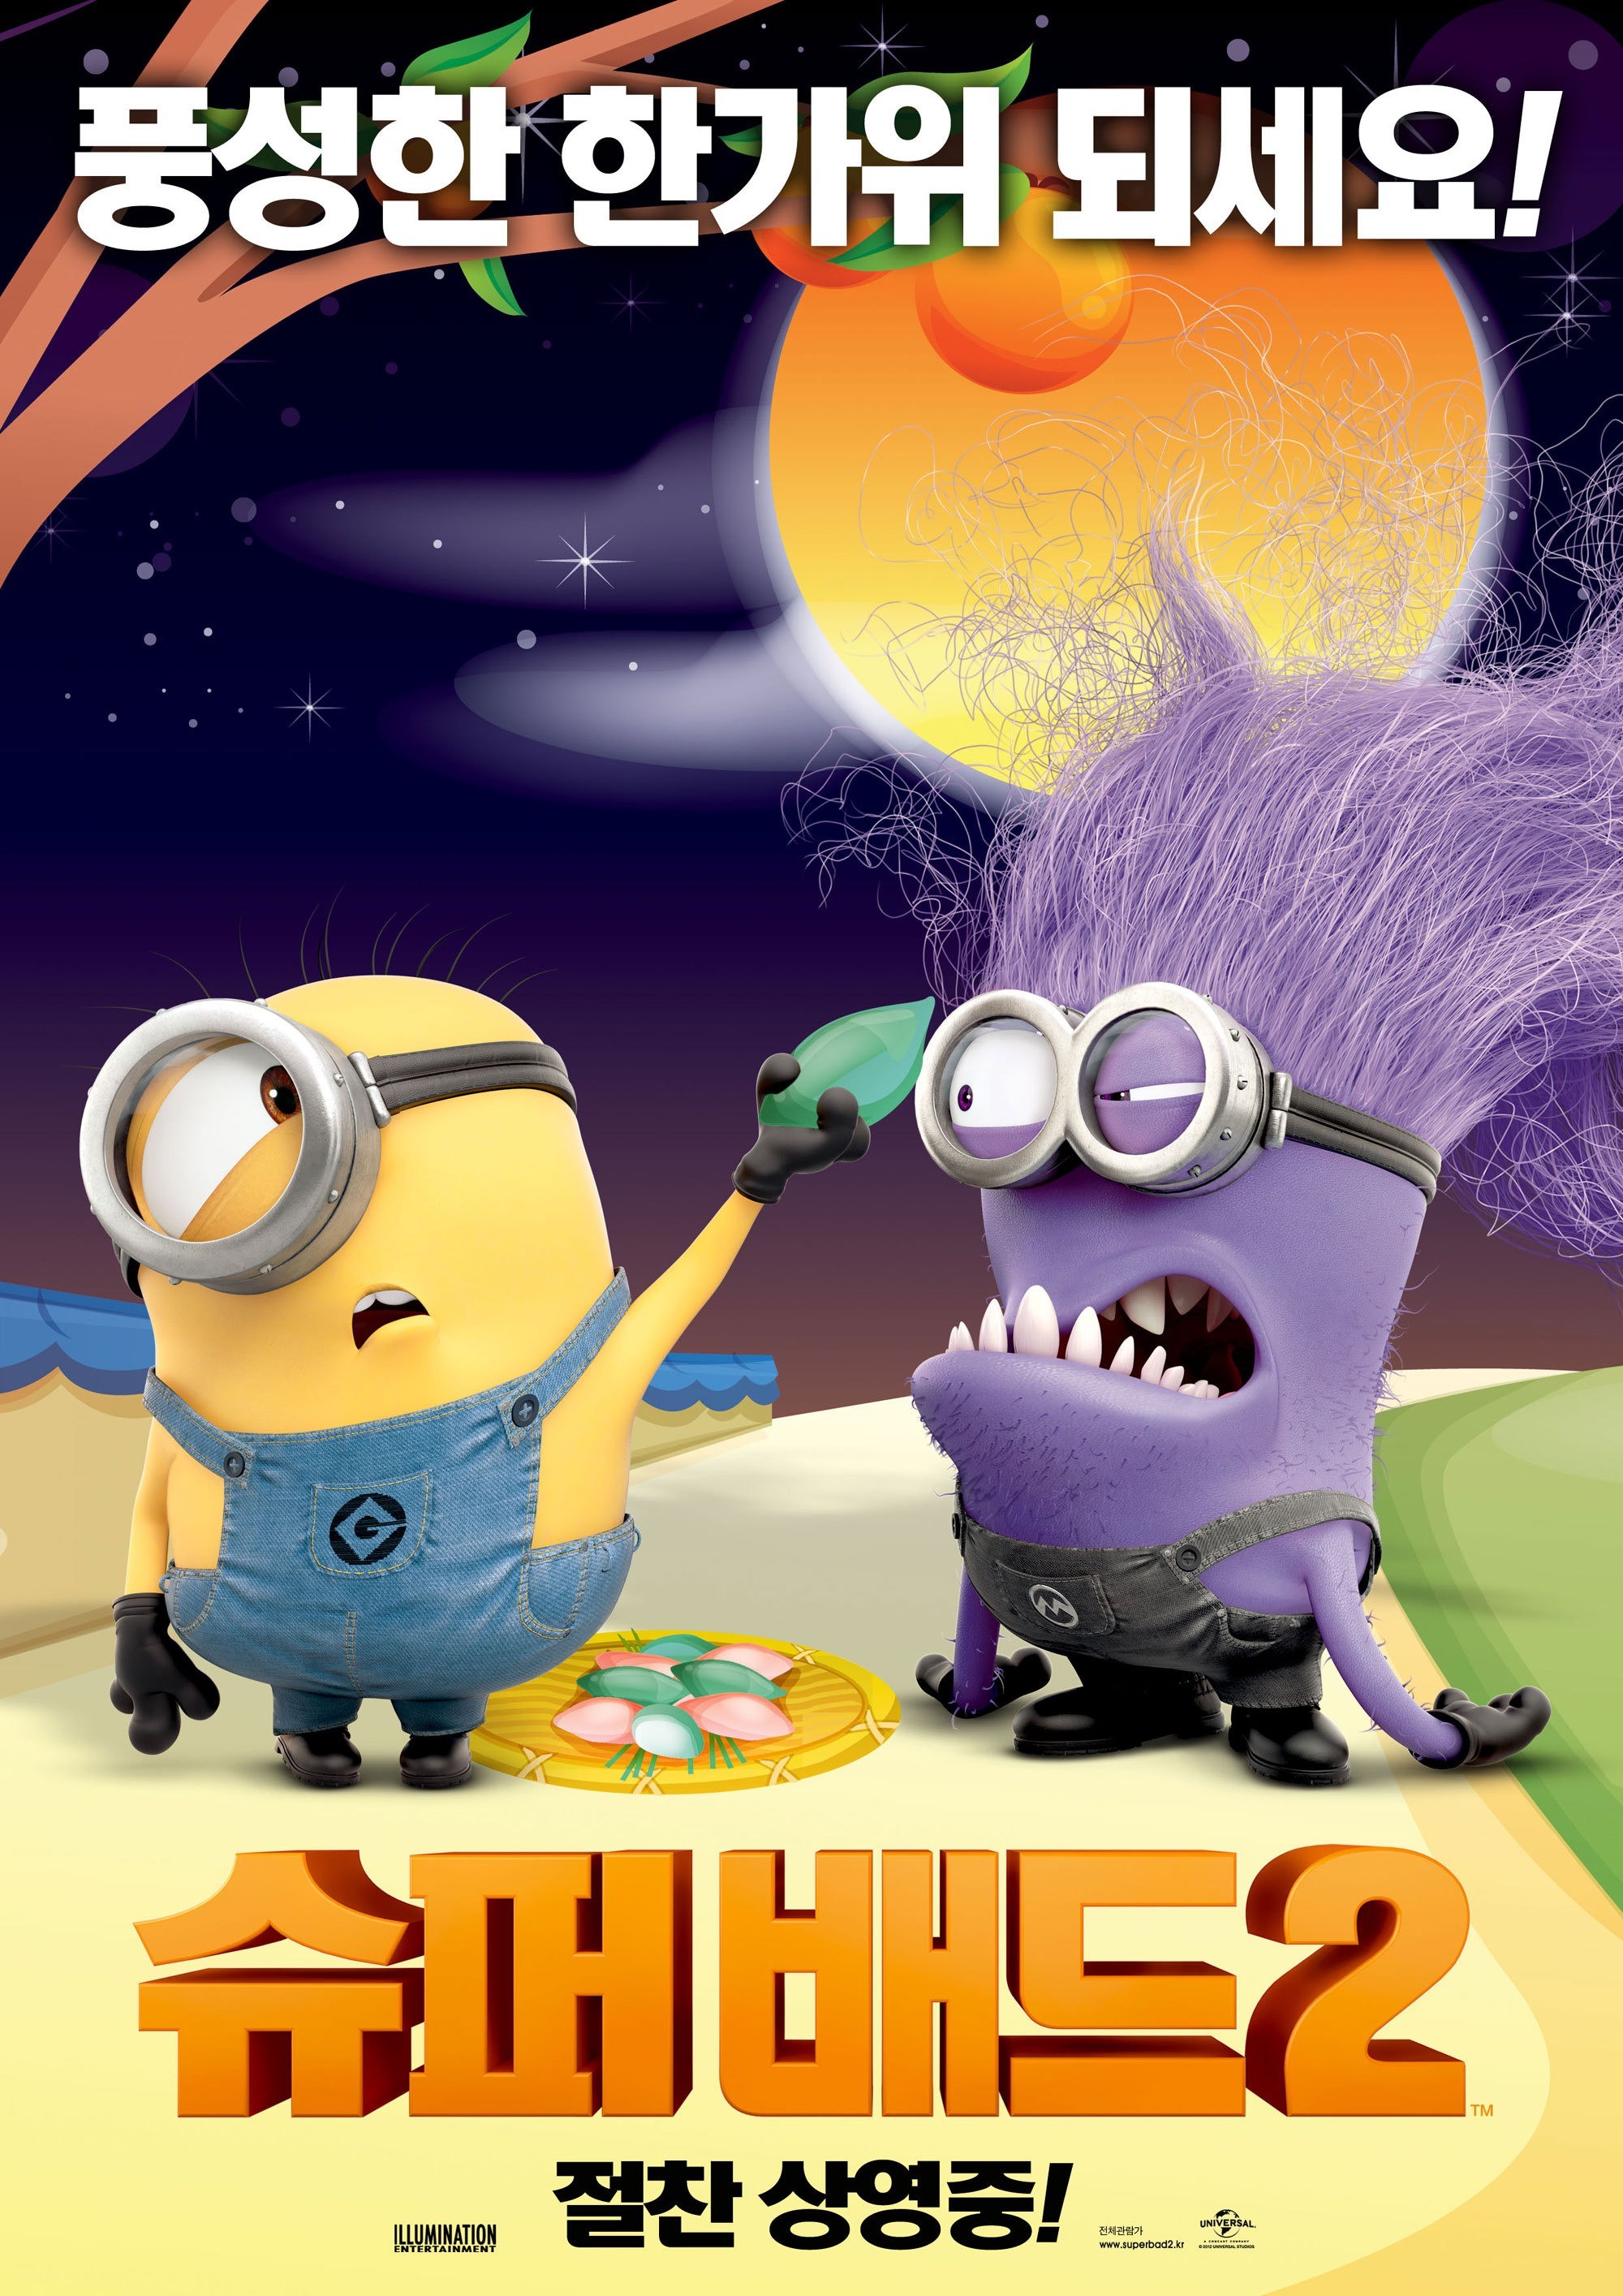 Mega Sized Movie Poster Image for Despicable Me 2 (#27 of 28)